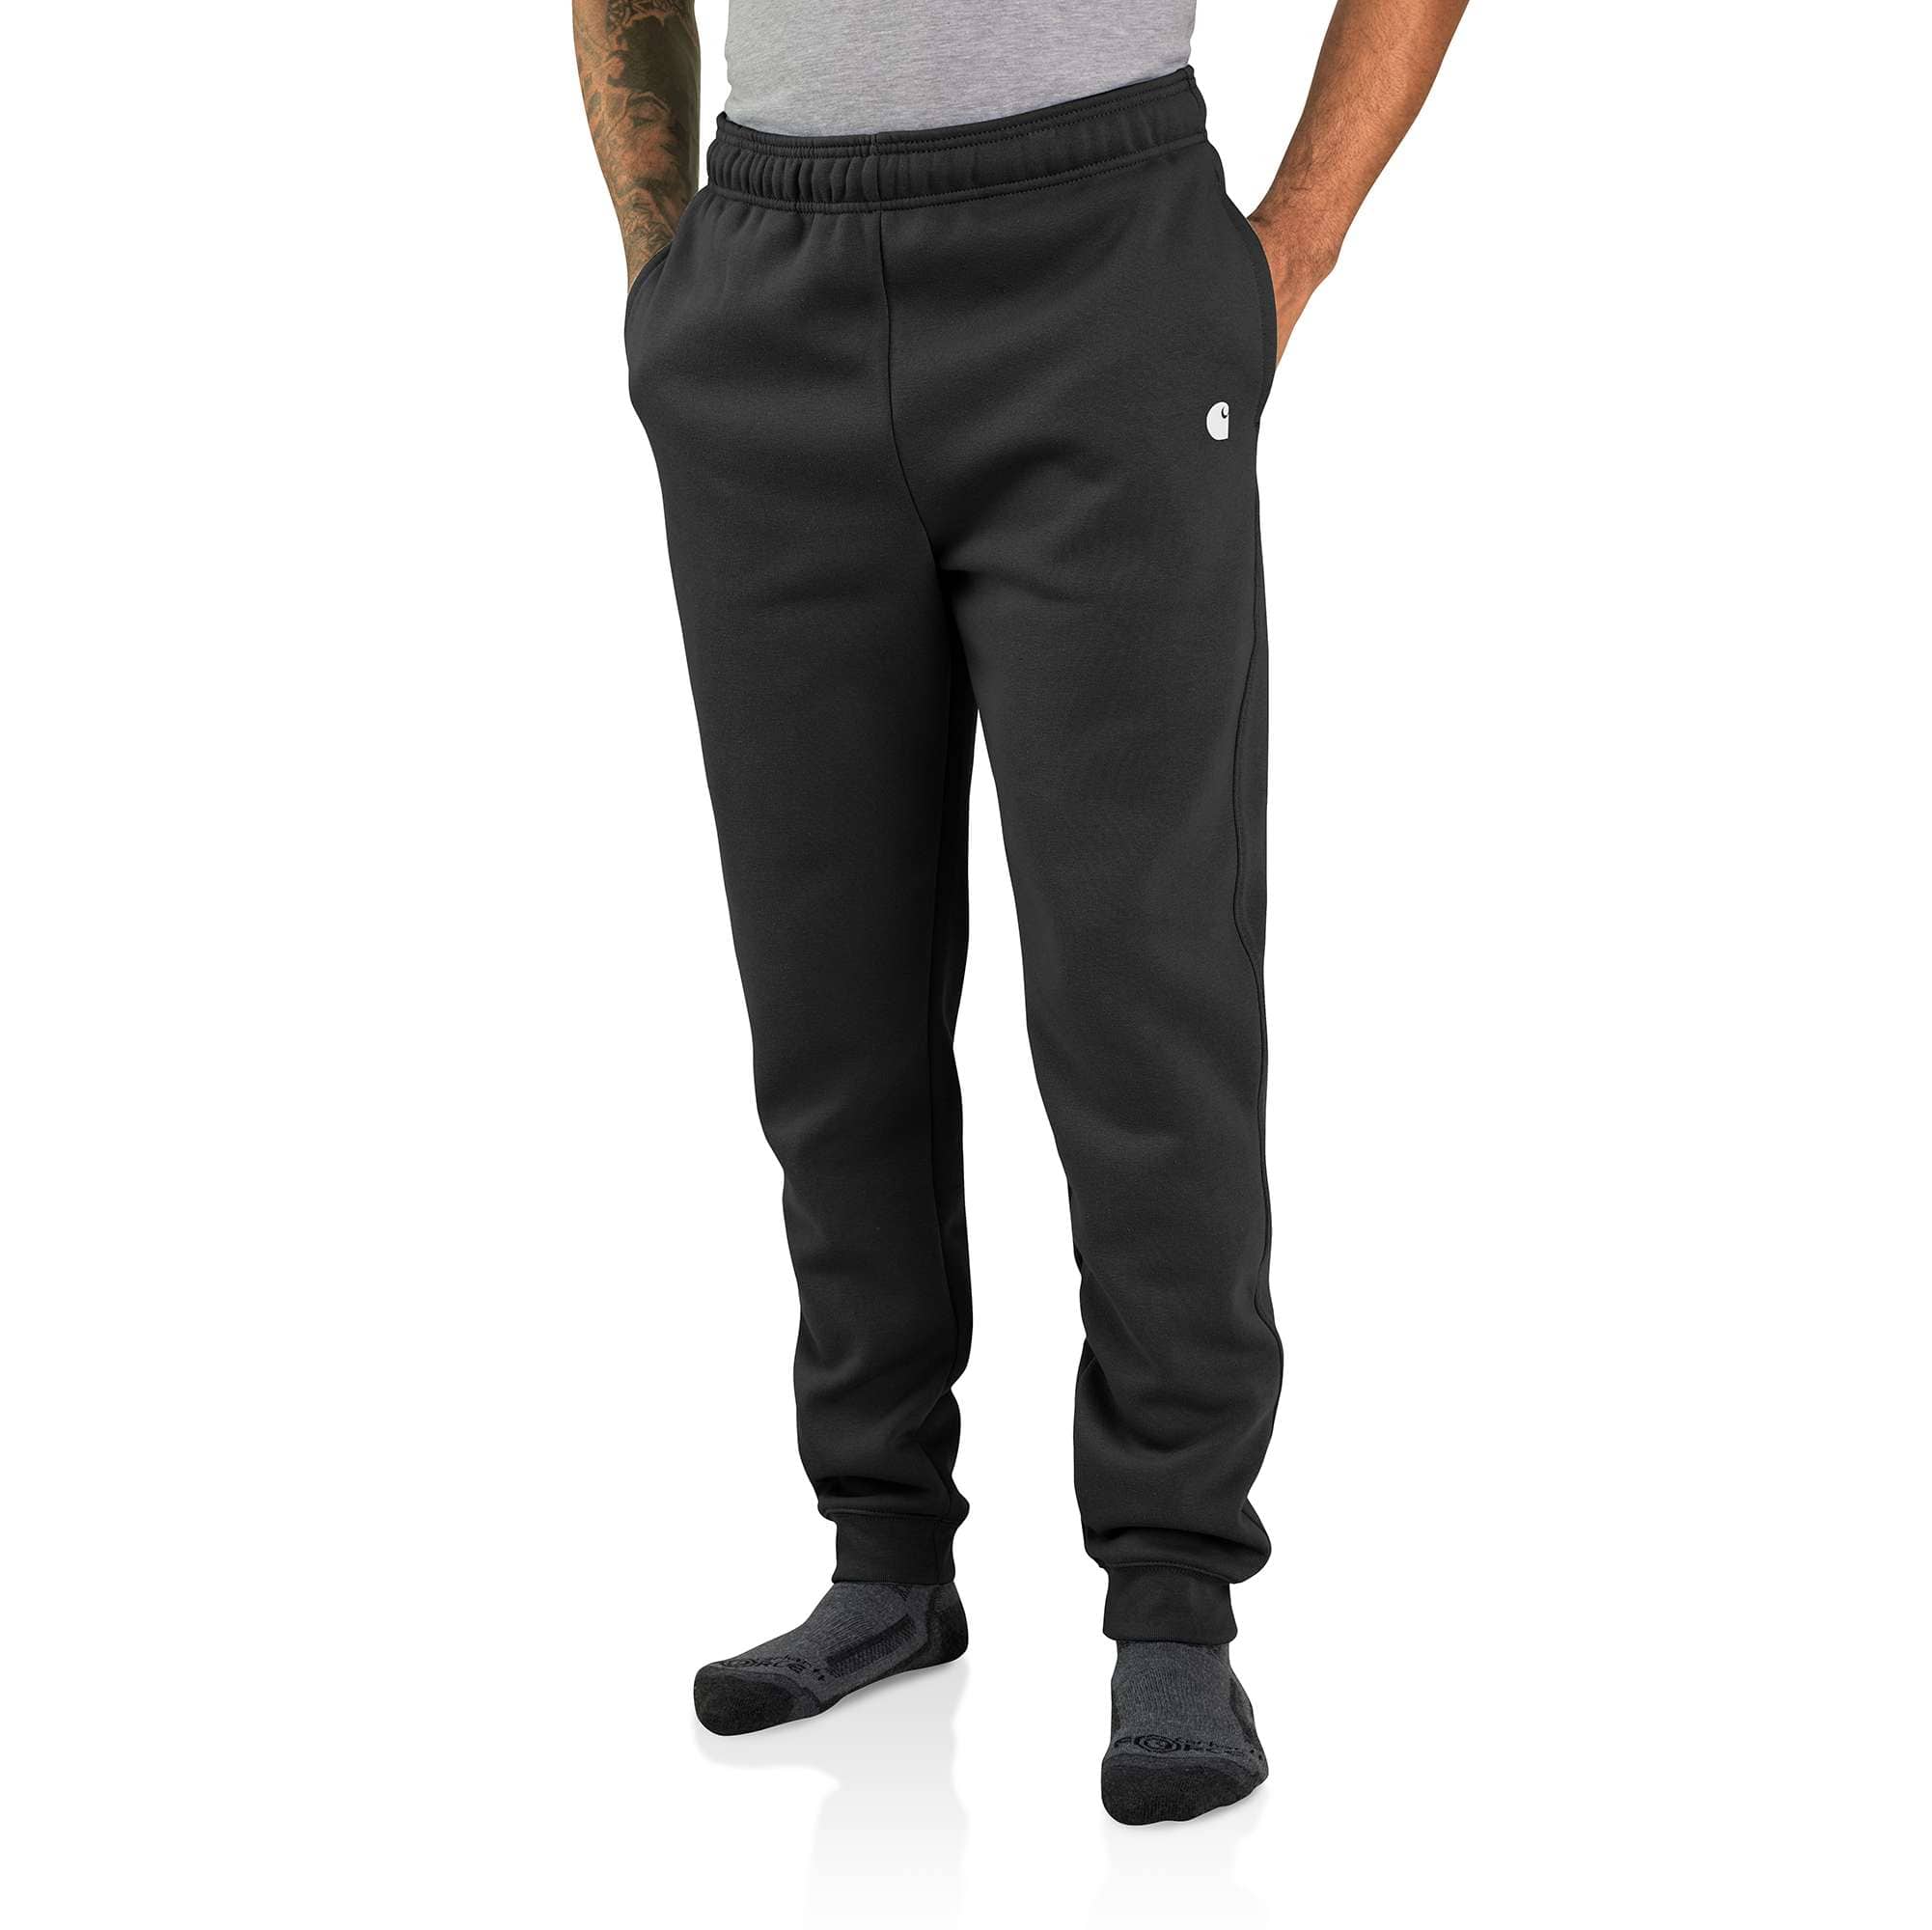 RELAXED FIT MIDWEIGHT TAPERED SWEATPANT